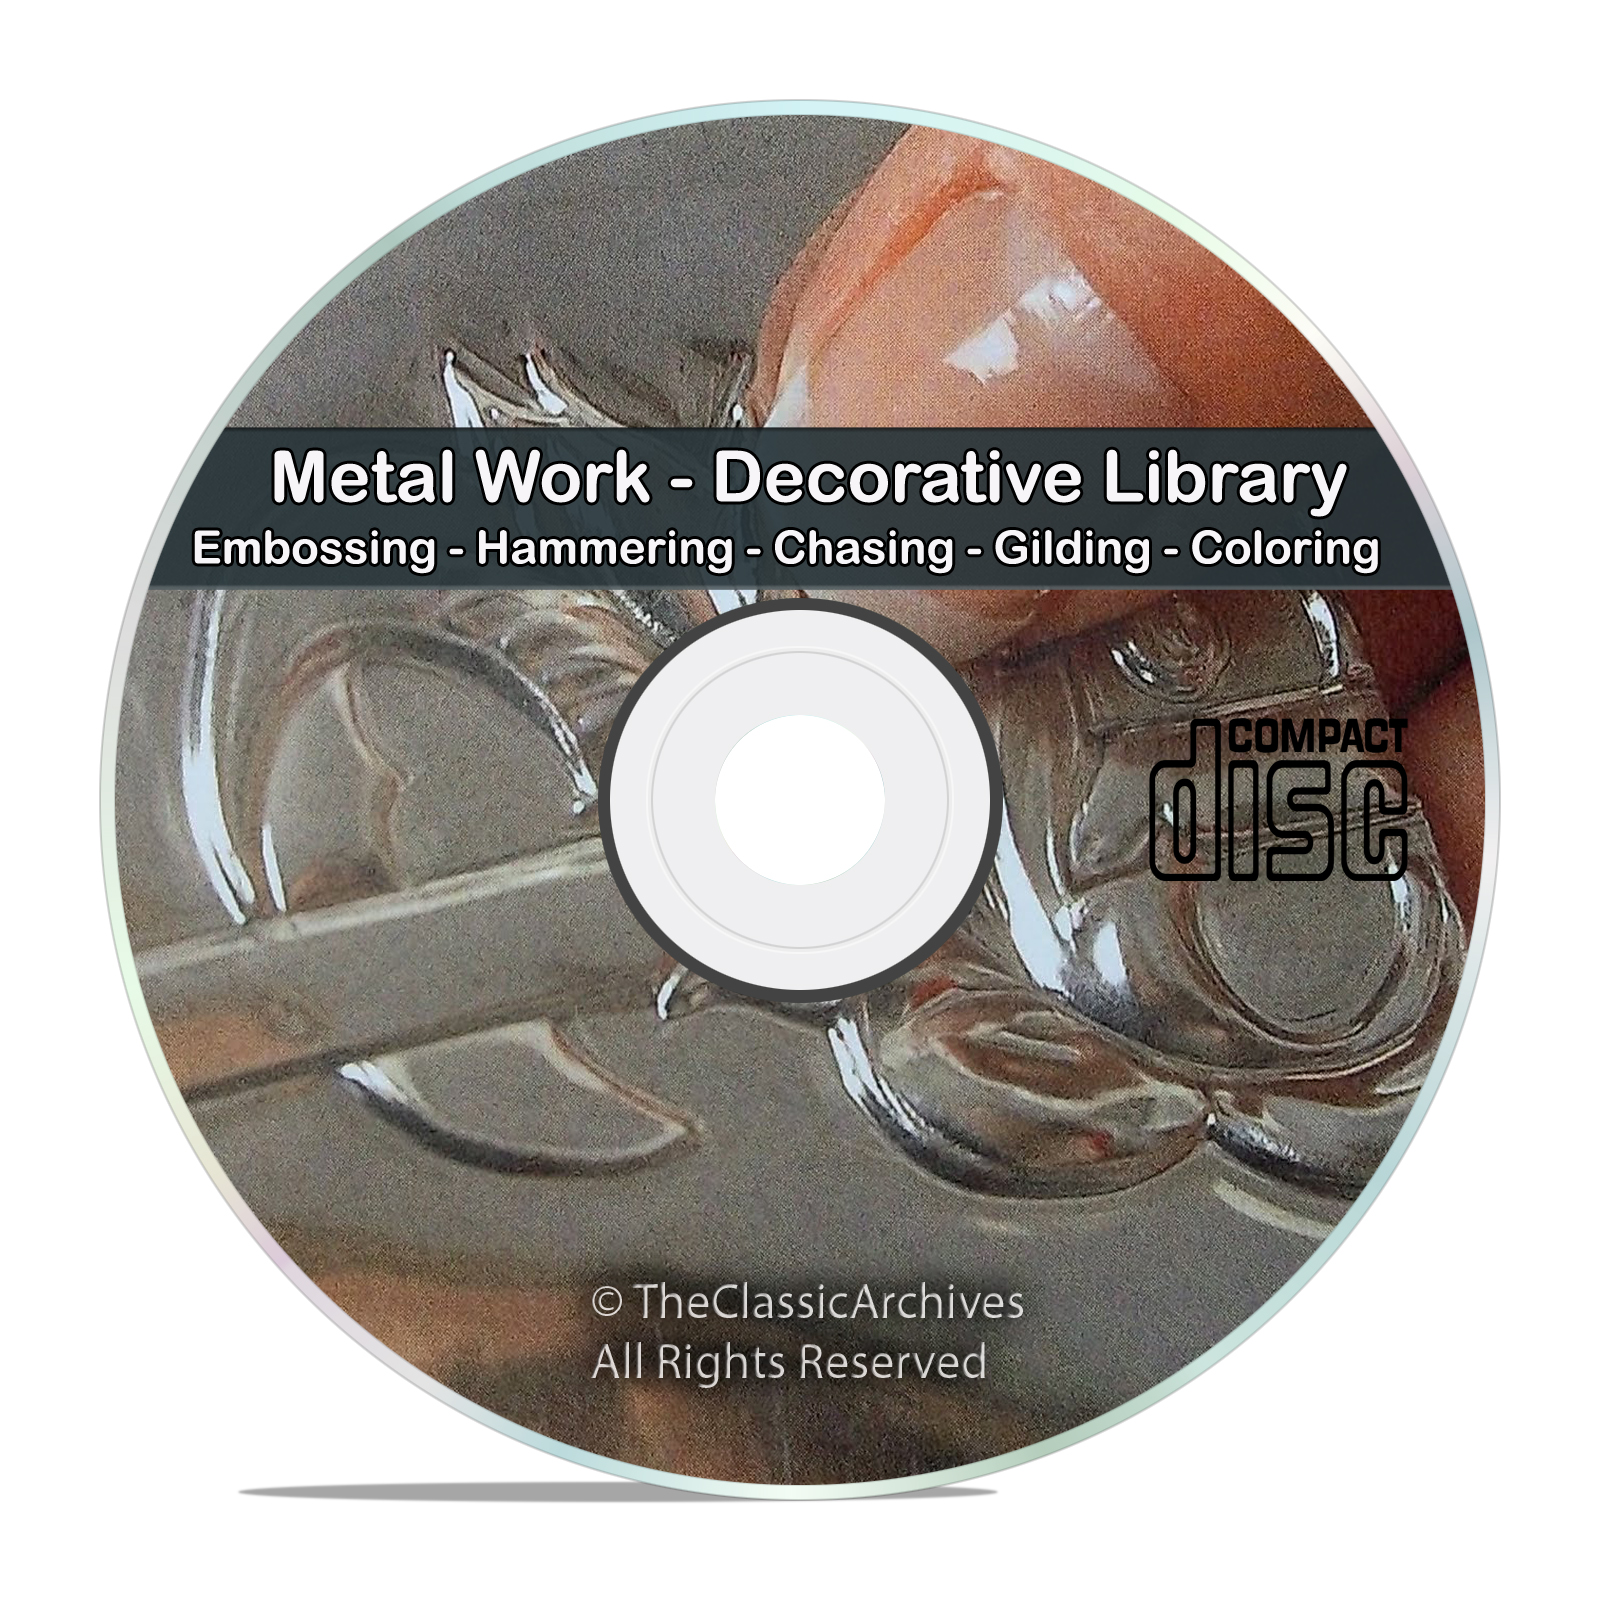 Decorative and Art Metal Work Embossing Hammering Repousse Books CD